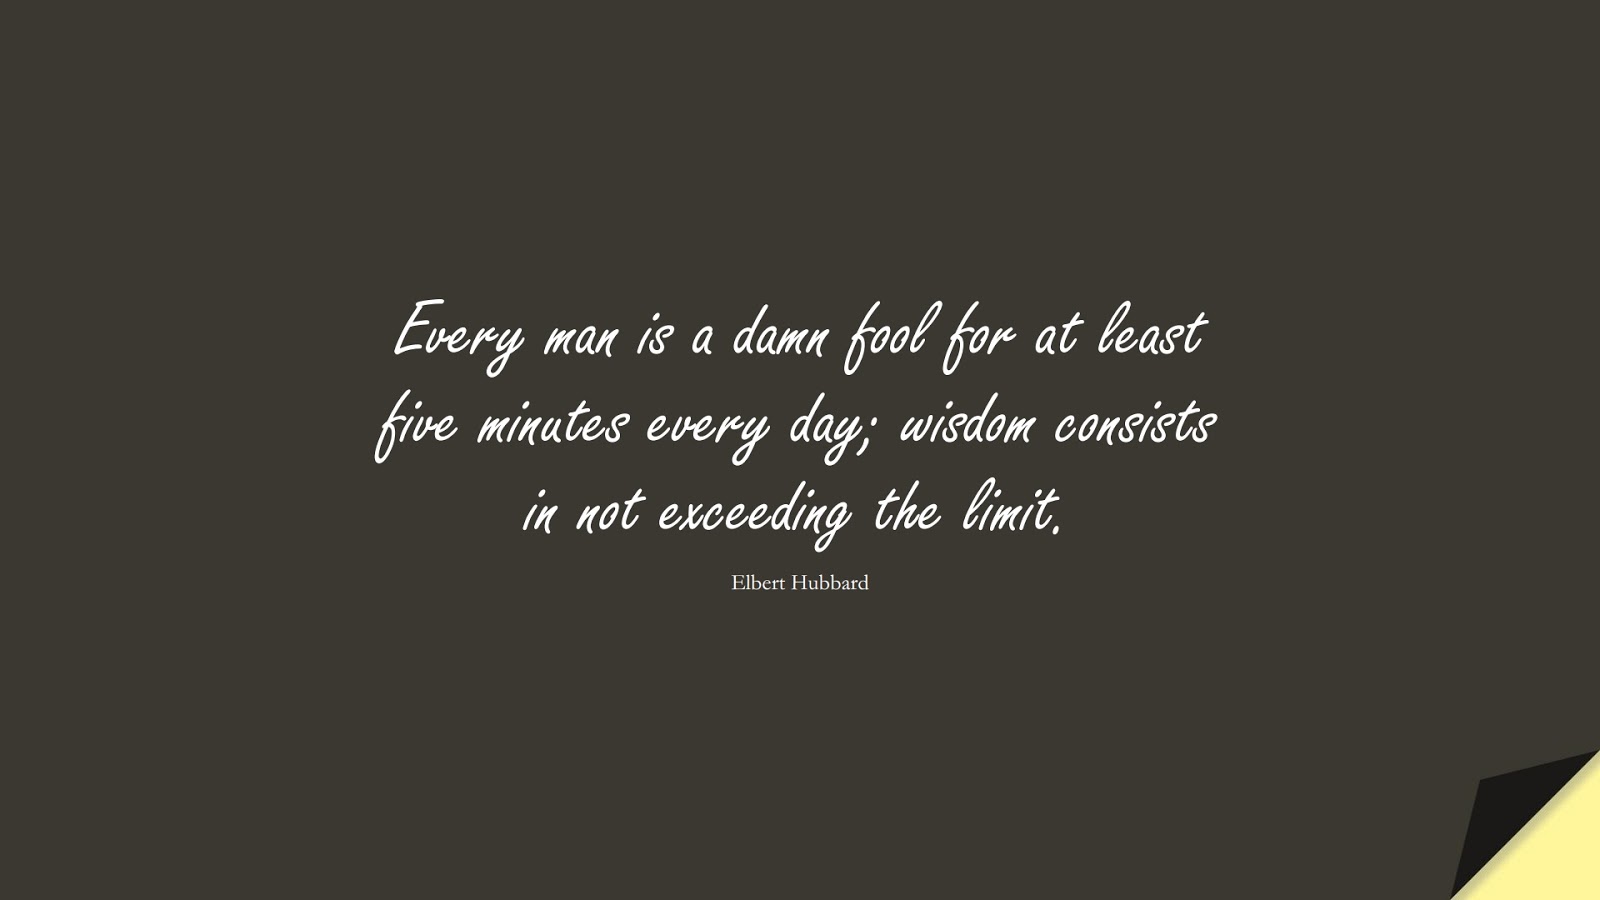 Every man is a damn fool for at least five minutes every day; wisdom consists in not exceeding the limit. (Elbert Hubbard);  #WordsofWisdom